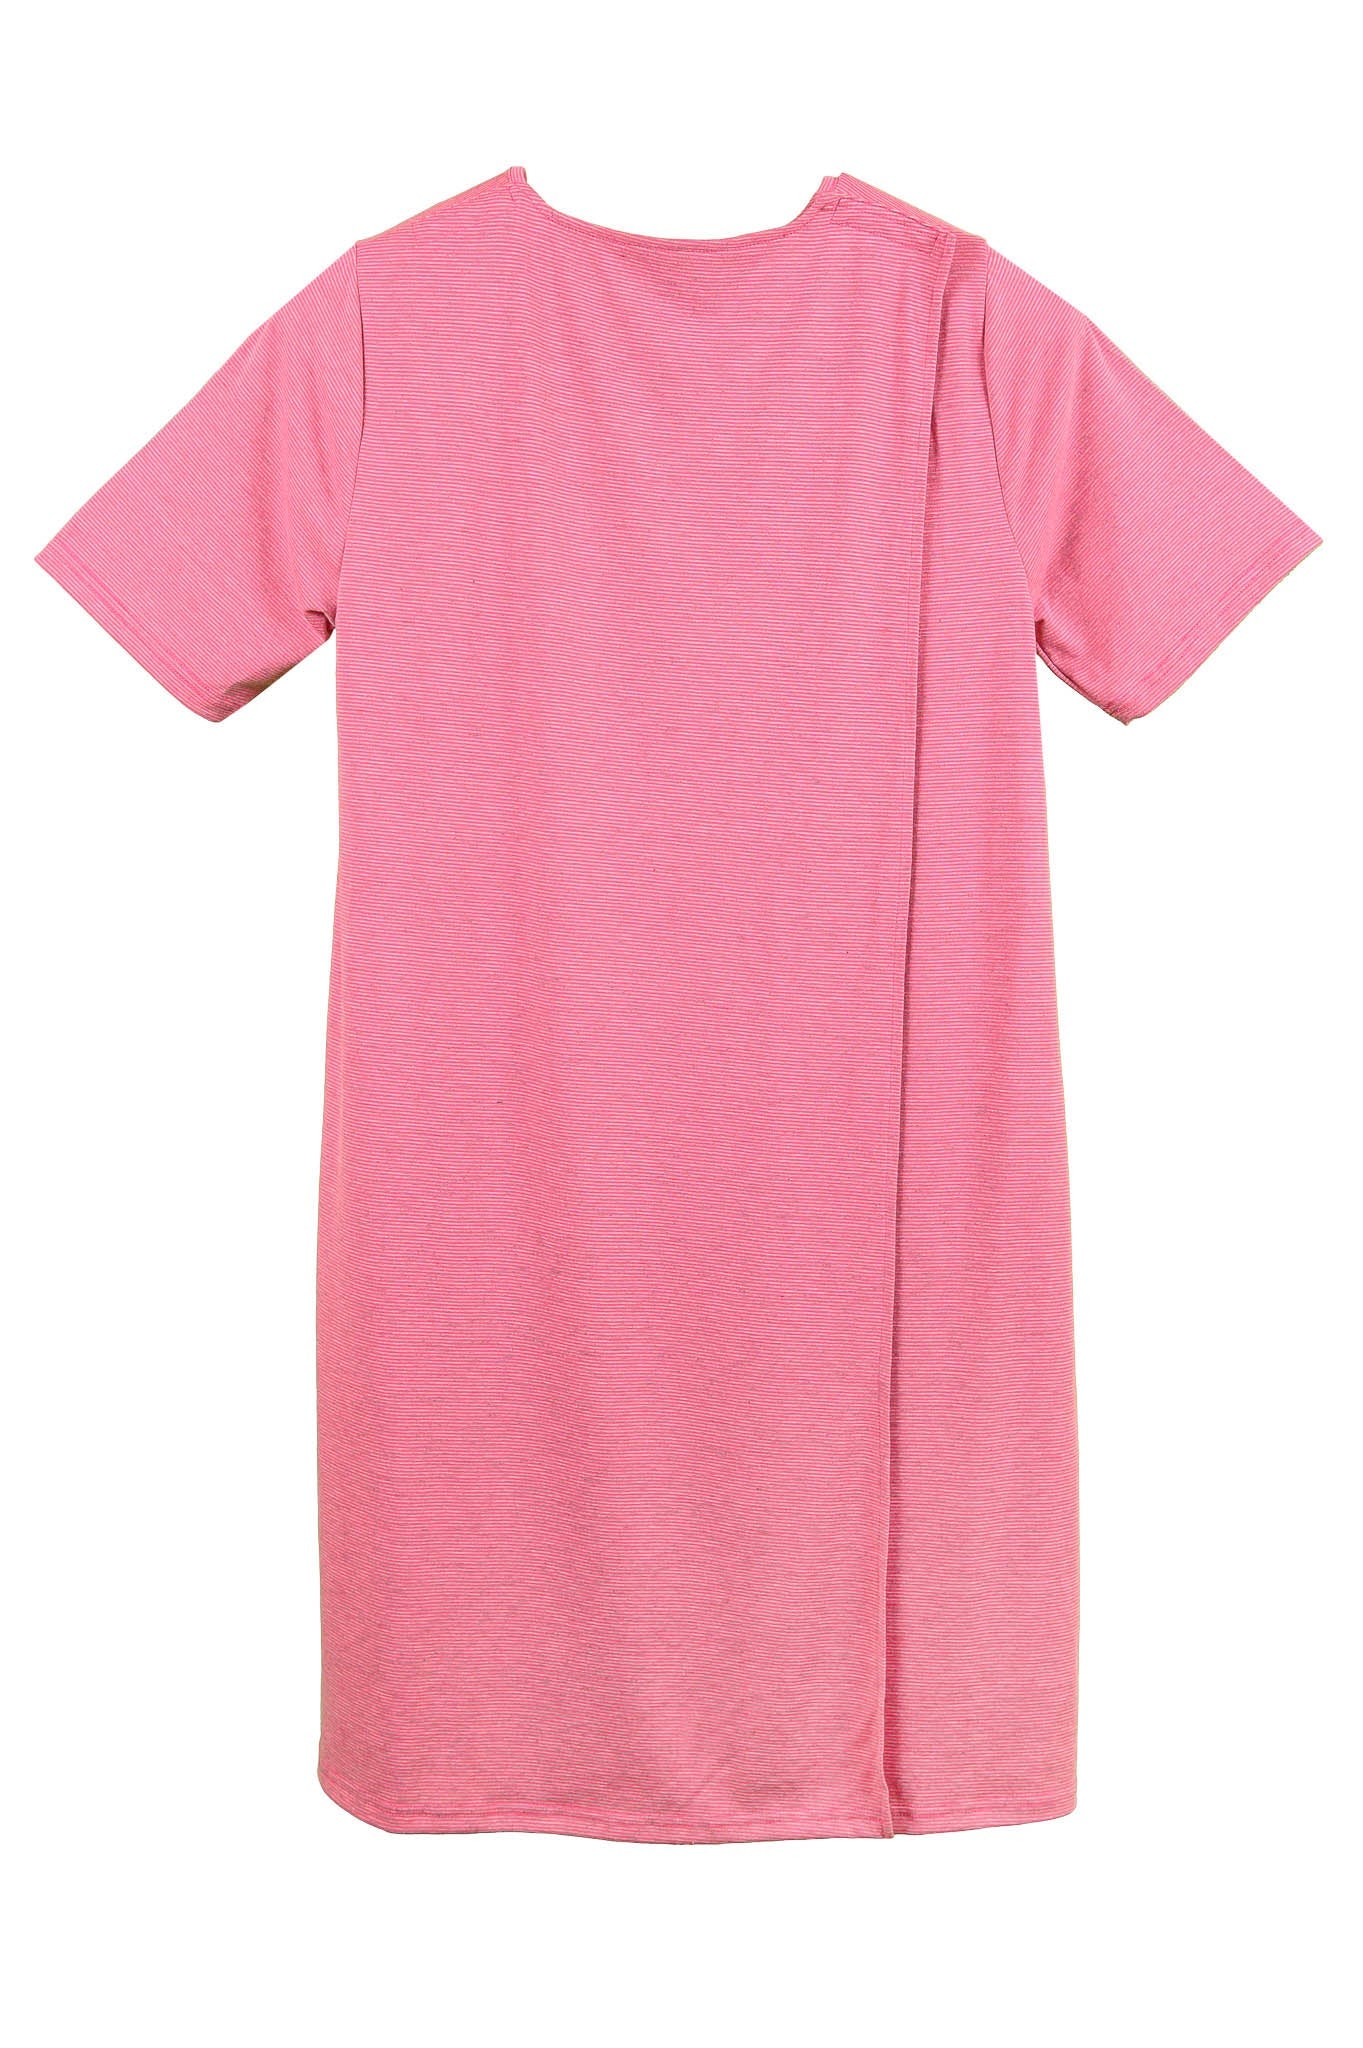 Cozy Adaptive Nightgown for Women | Art in Aging